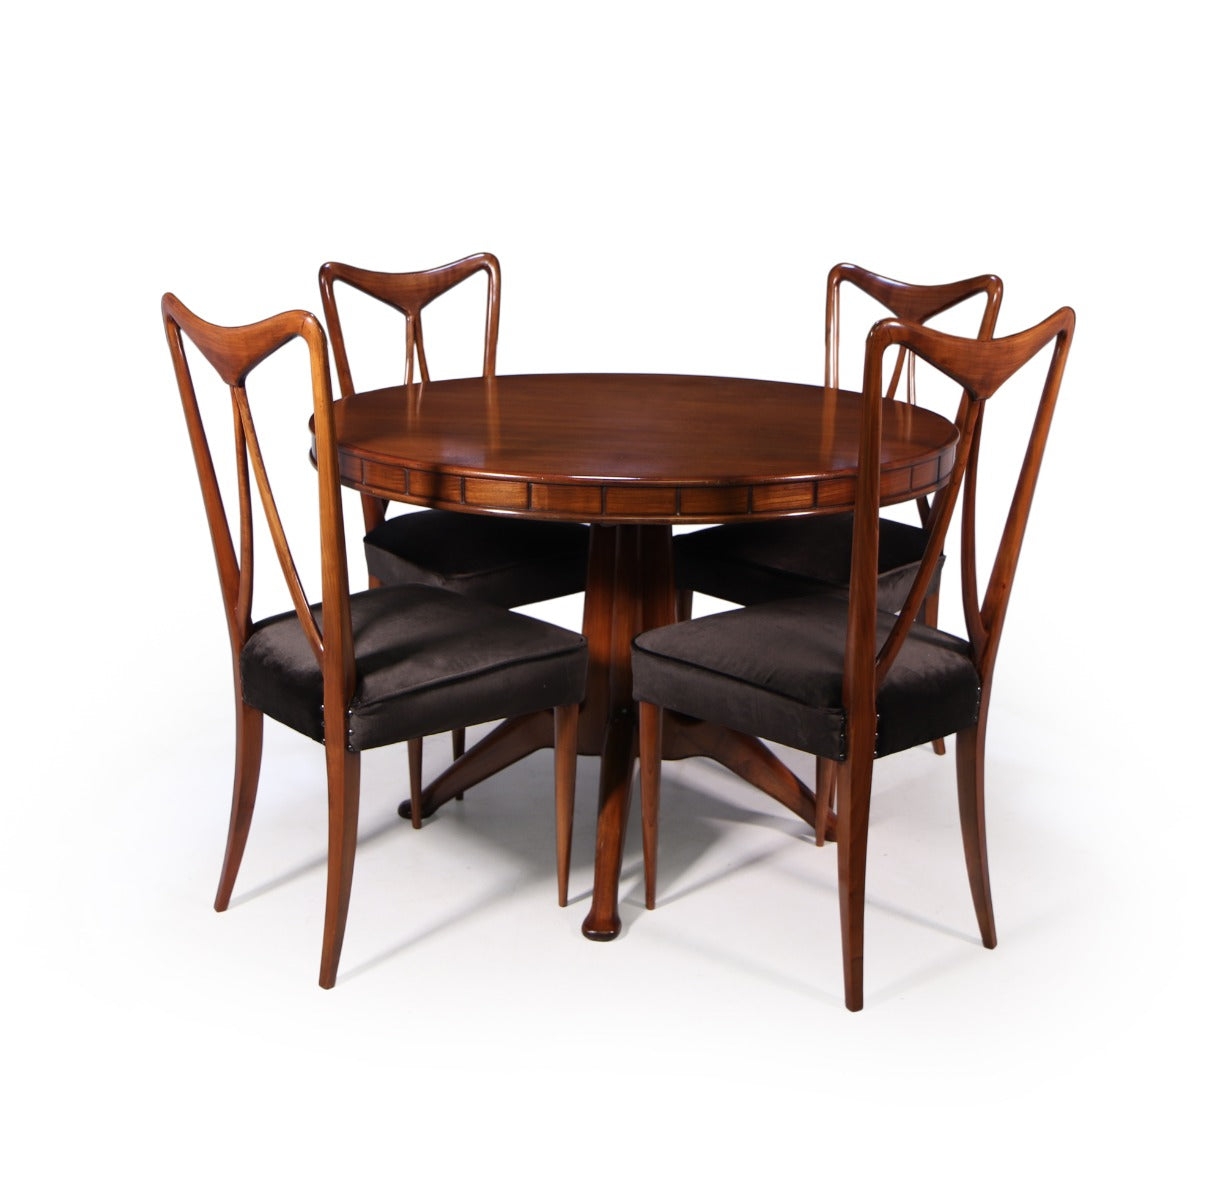 Italian Mid Century Table and Chairs – The Furniture Rooms